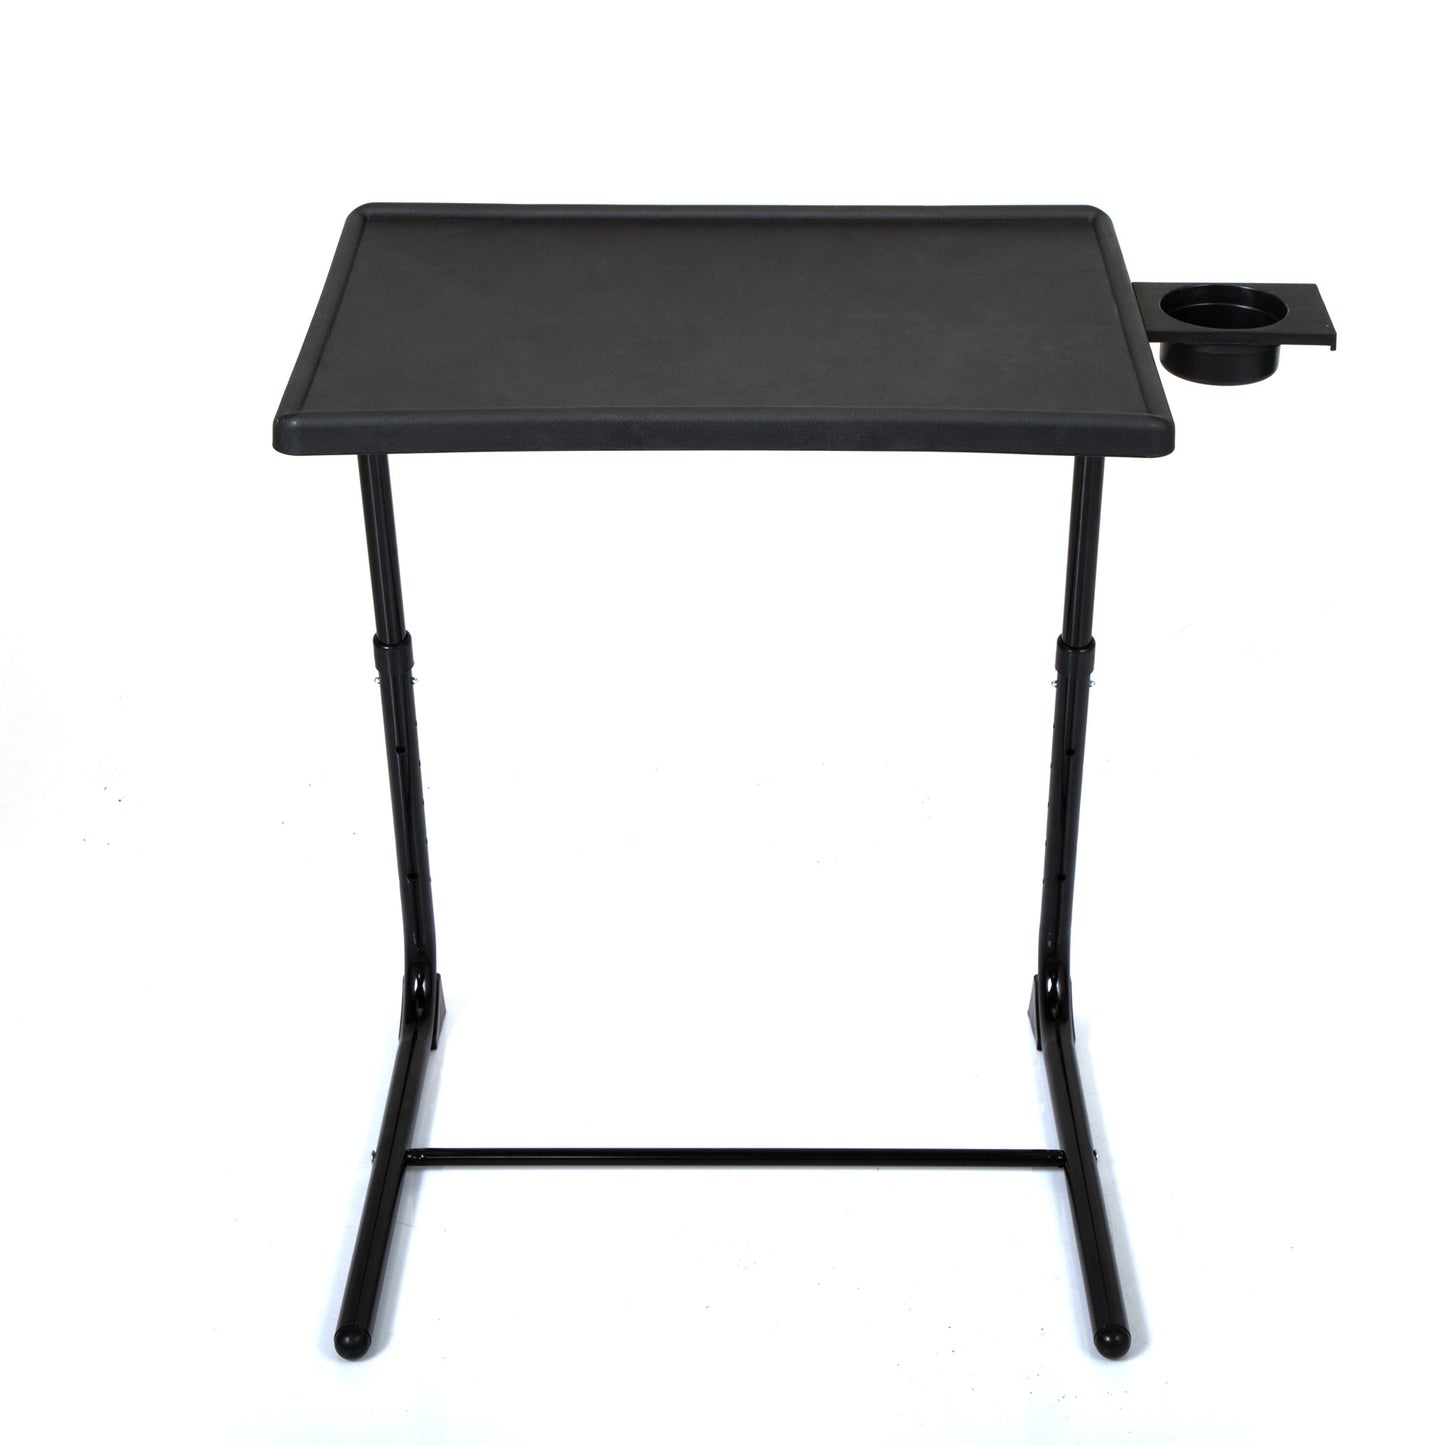 Adjustable TV Tray Table with Cup Holder;  Folding TV Dinner Table with 6 Height and 3 Tilt Angle Adjustments